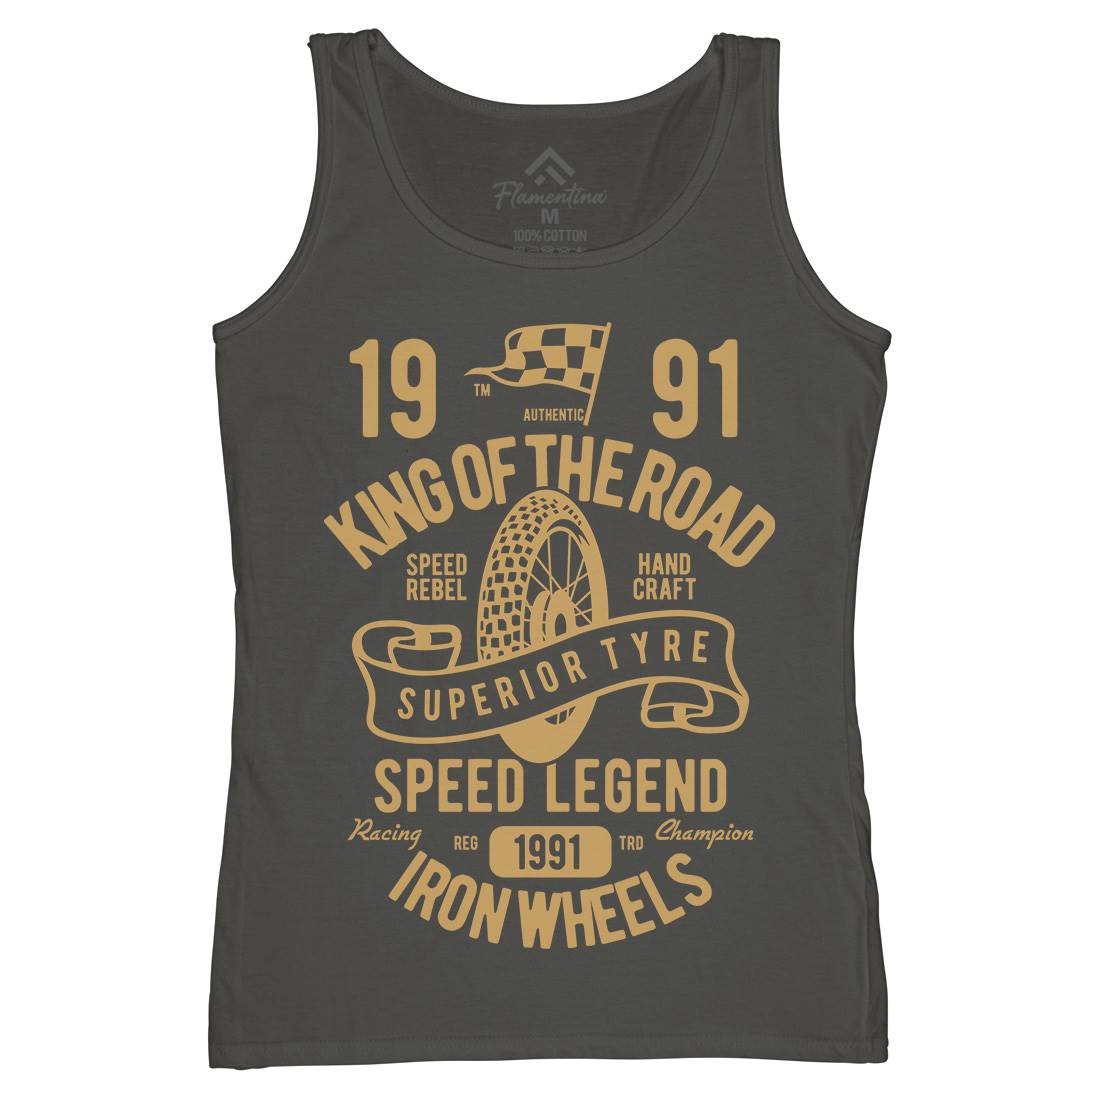 Superior Tyre King Of The Road Womens Organic Tank Top Vest Motorcycles B458